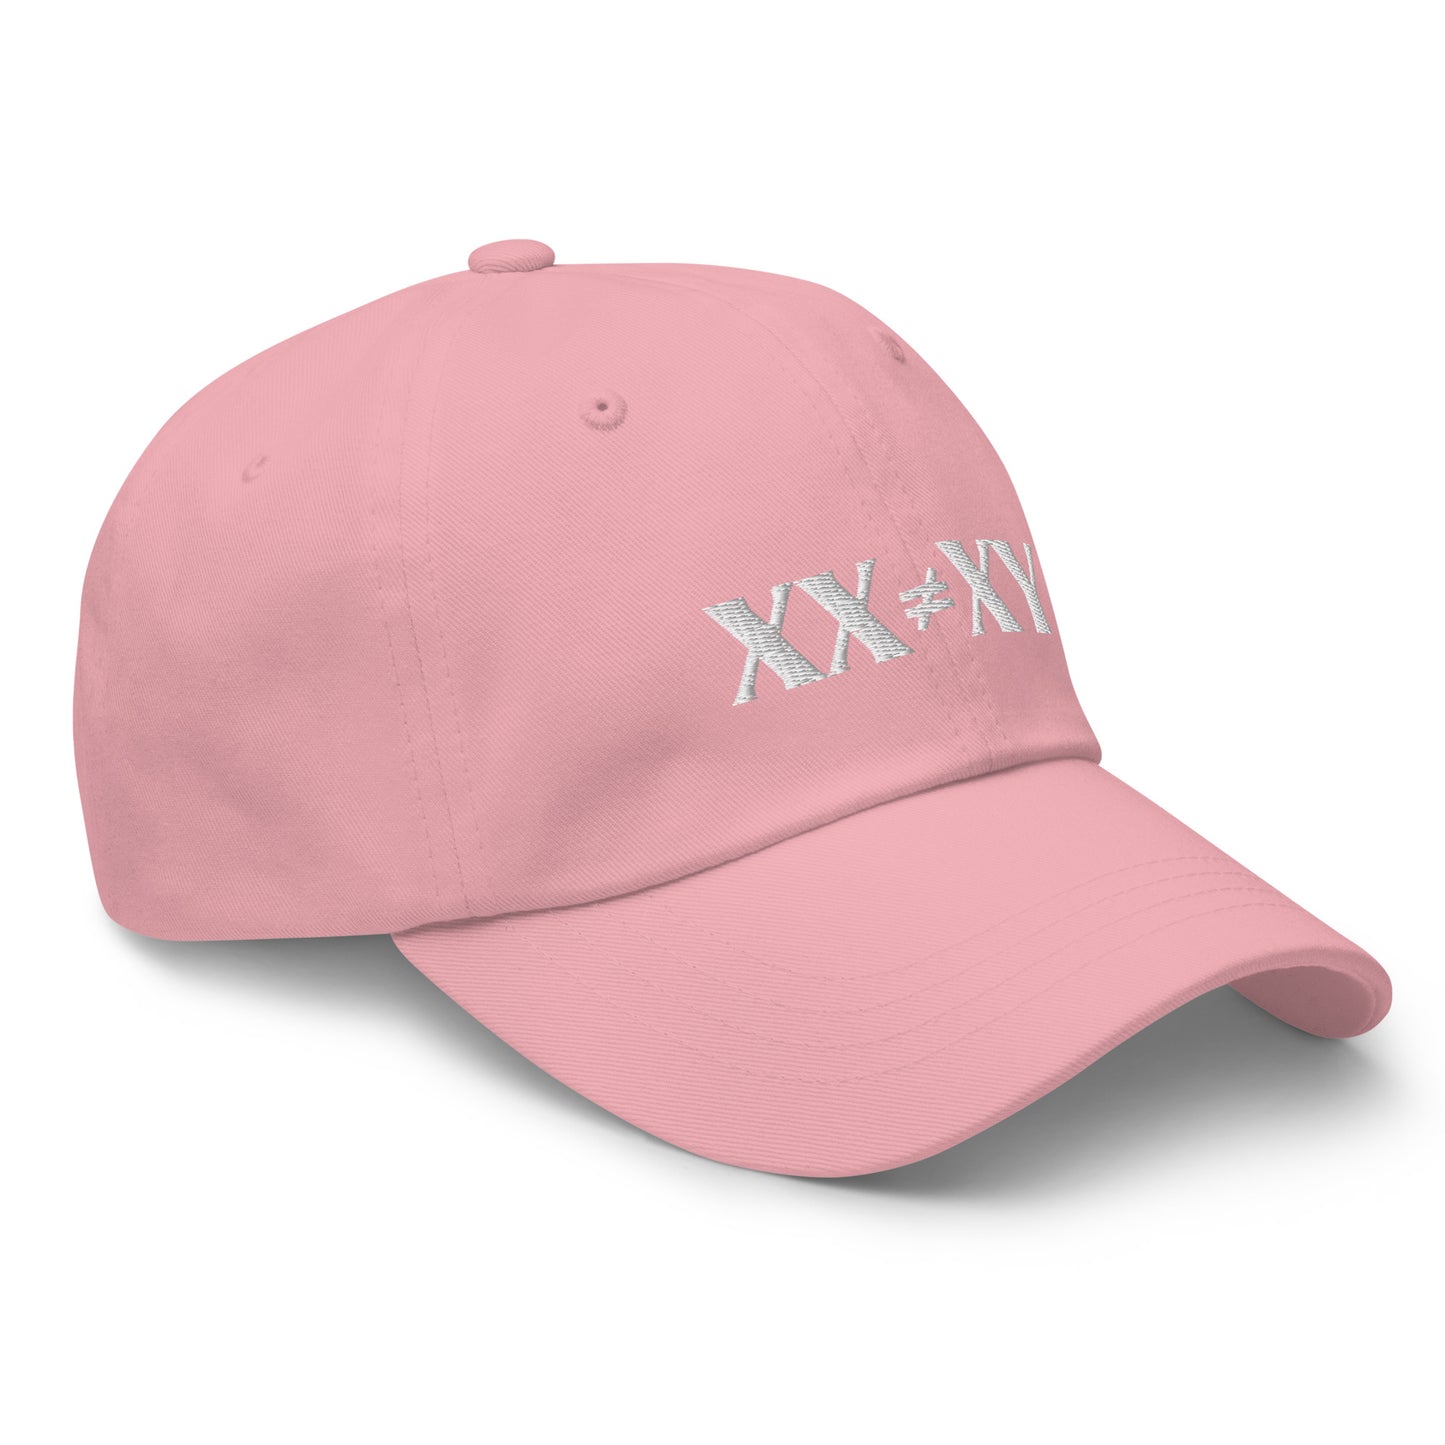 XX Does Not Equal XY Hat